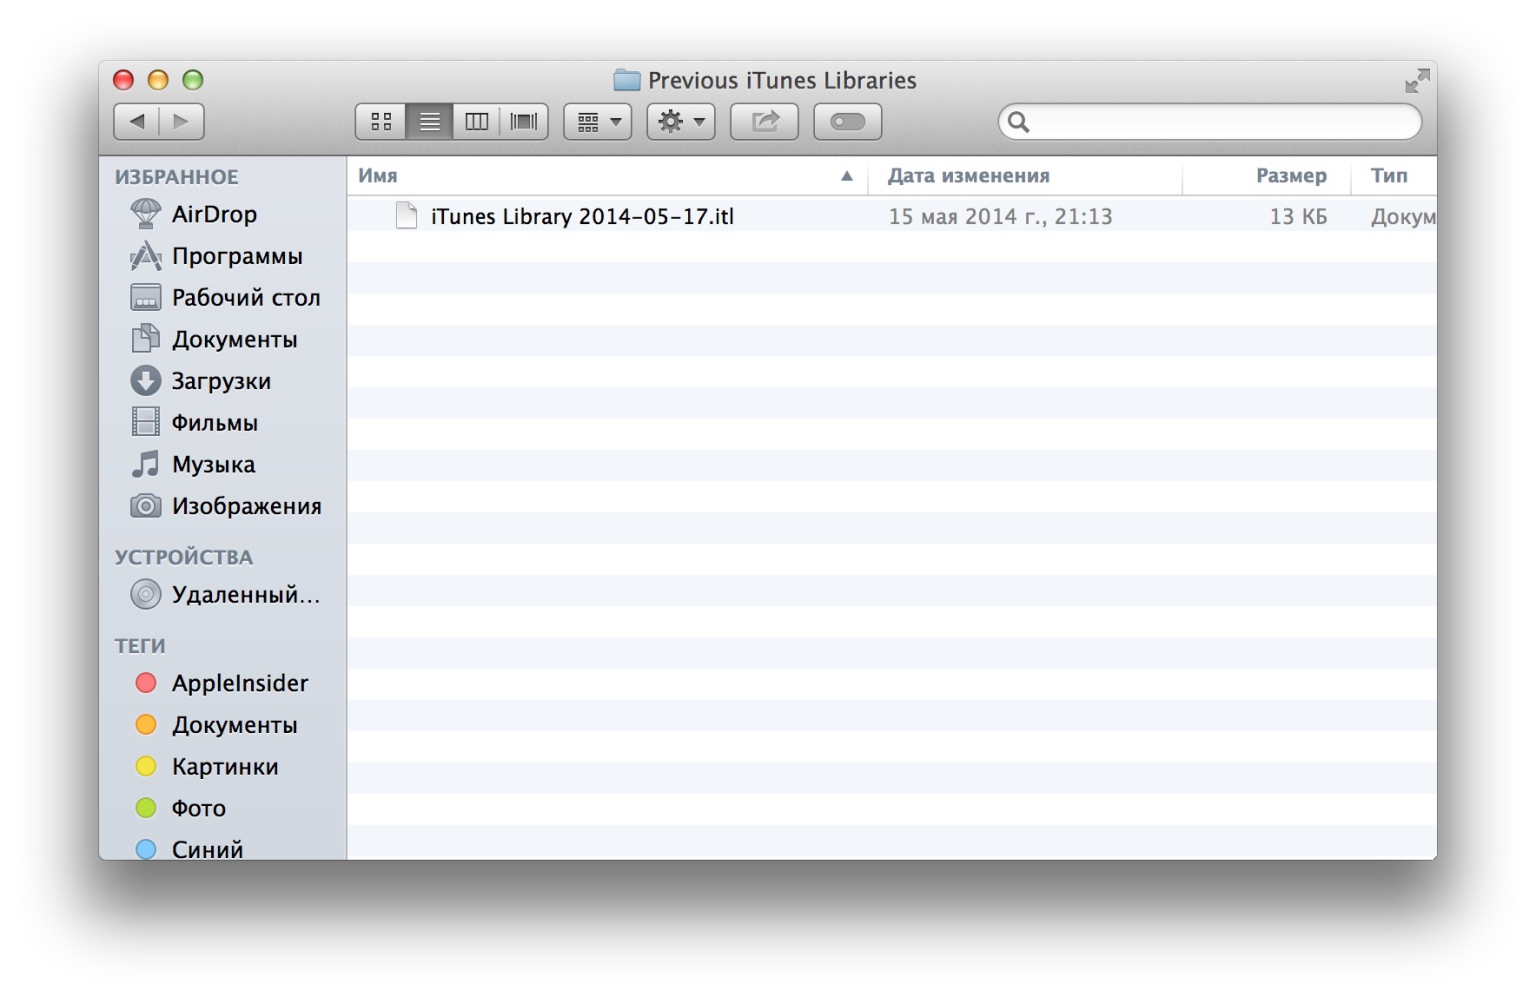 Itunes library itl. ITUNES общий доступ к файлам. File ITUNES Library ITL cannot be read.